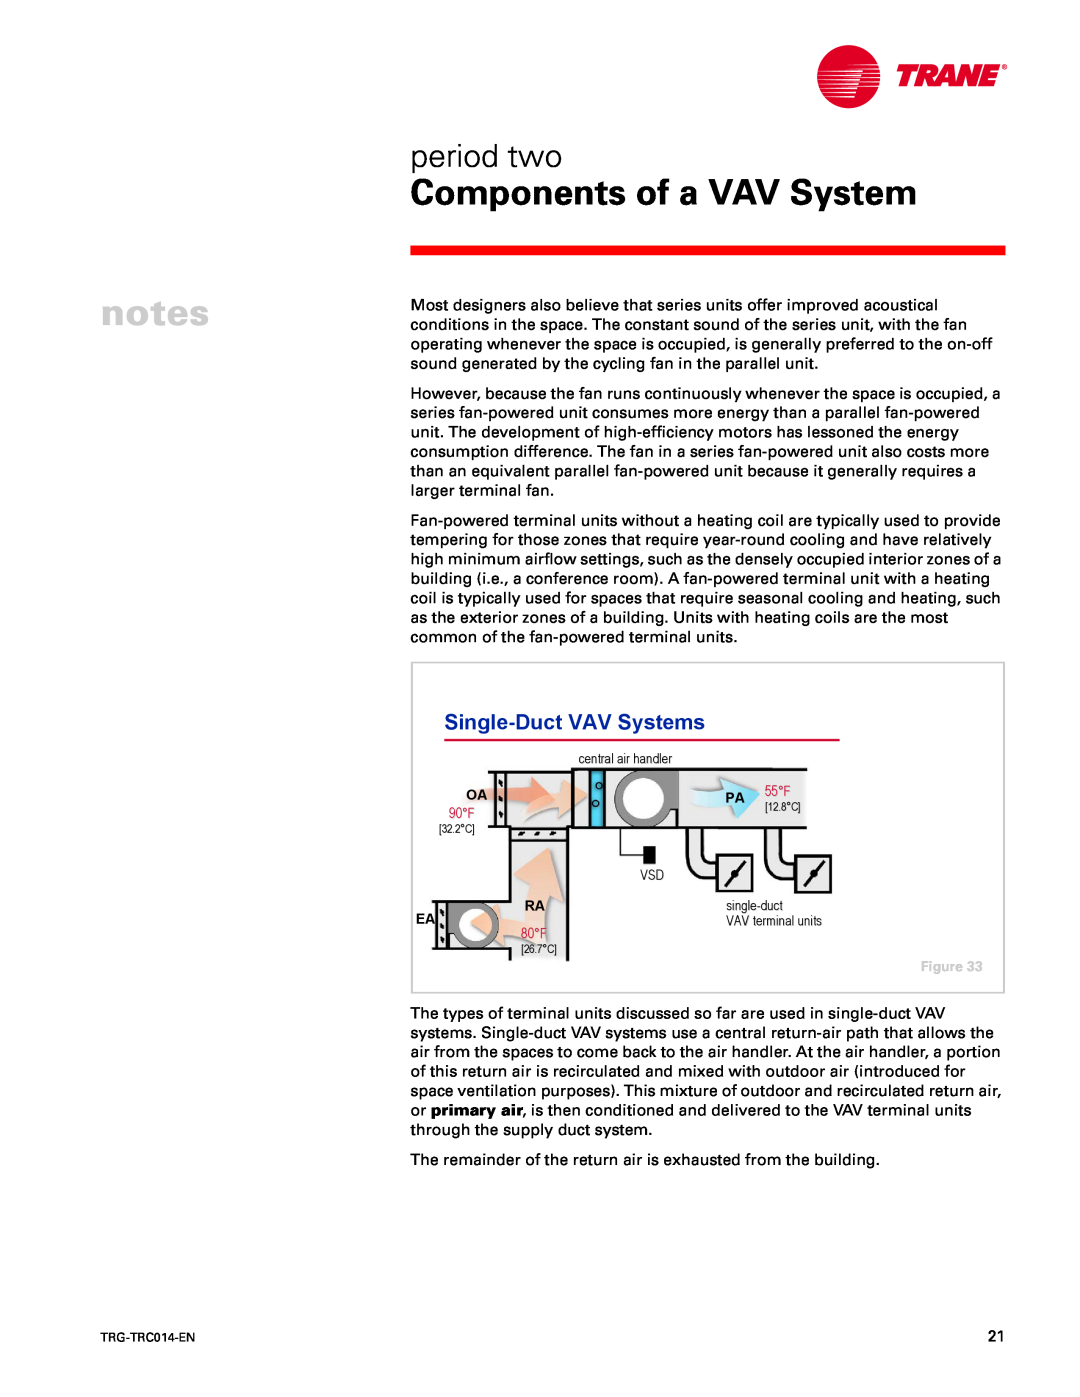 Trane TRG-TRC014-EN manual Single-DuctVAV Systems, Components of a VAV System, period two 